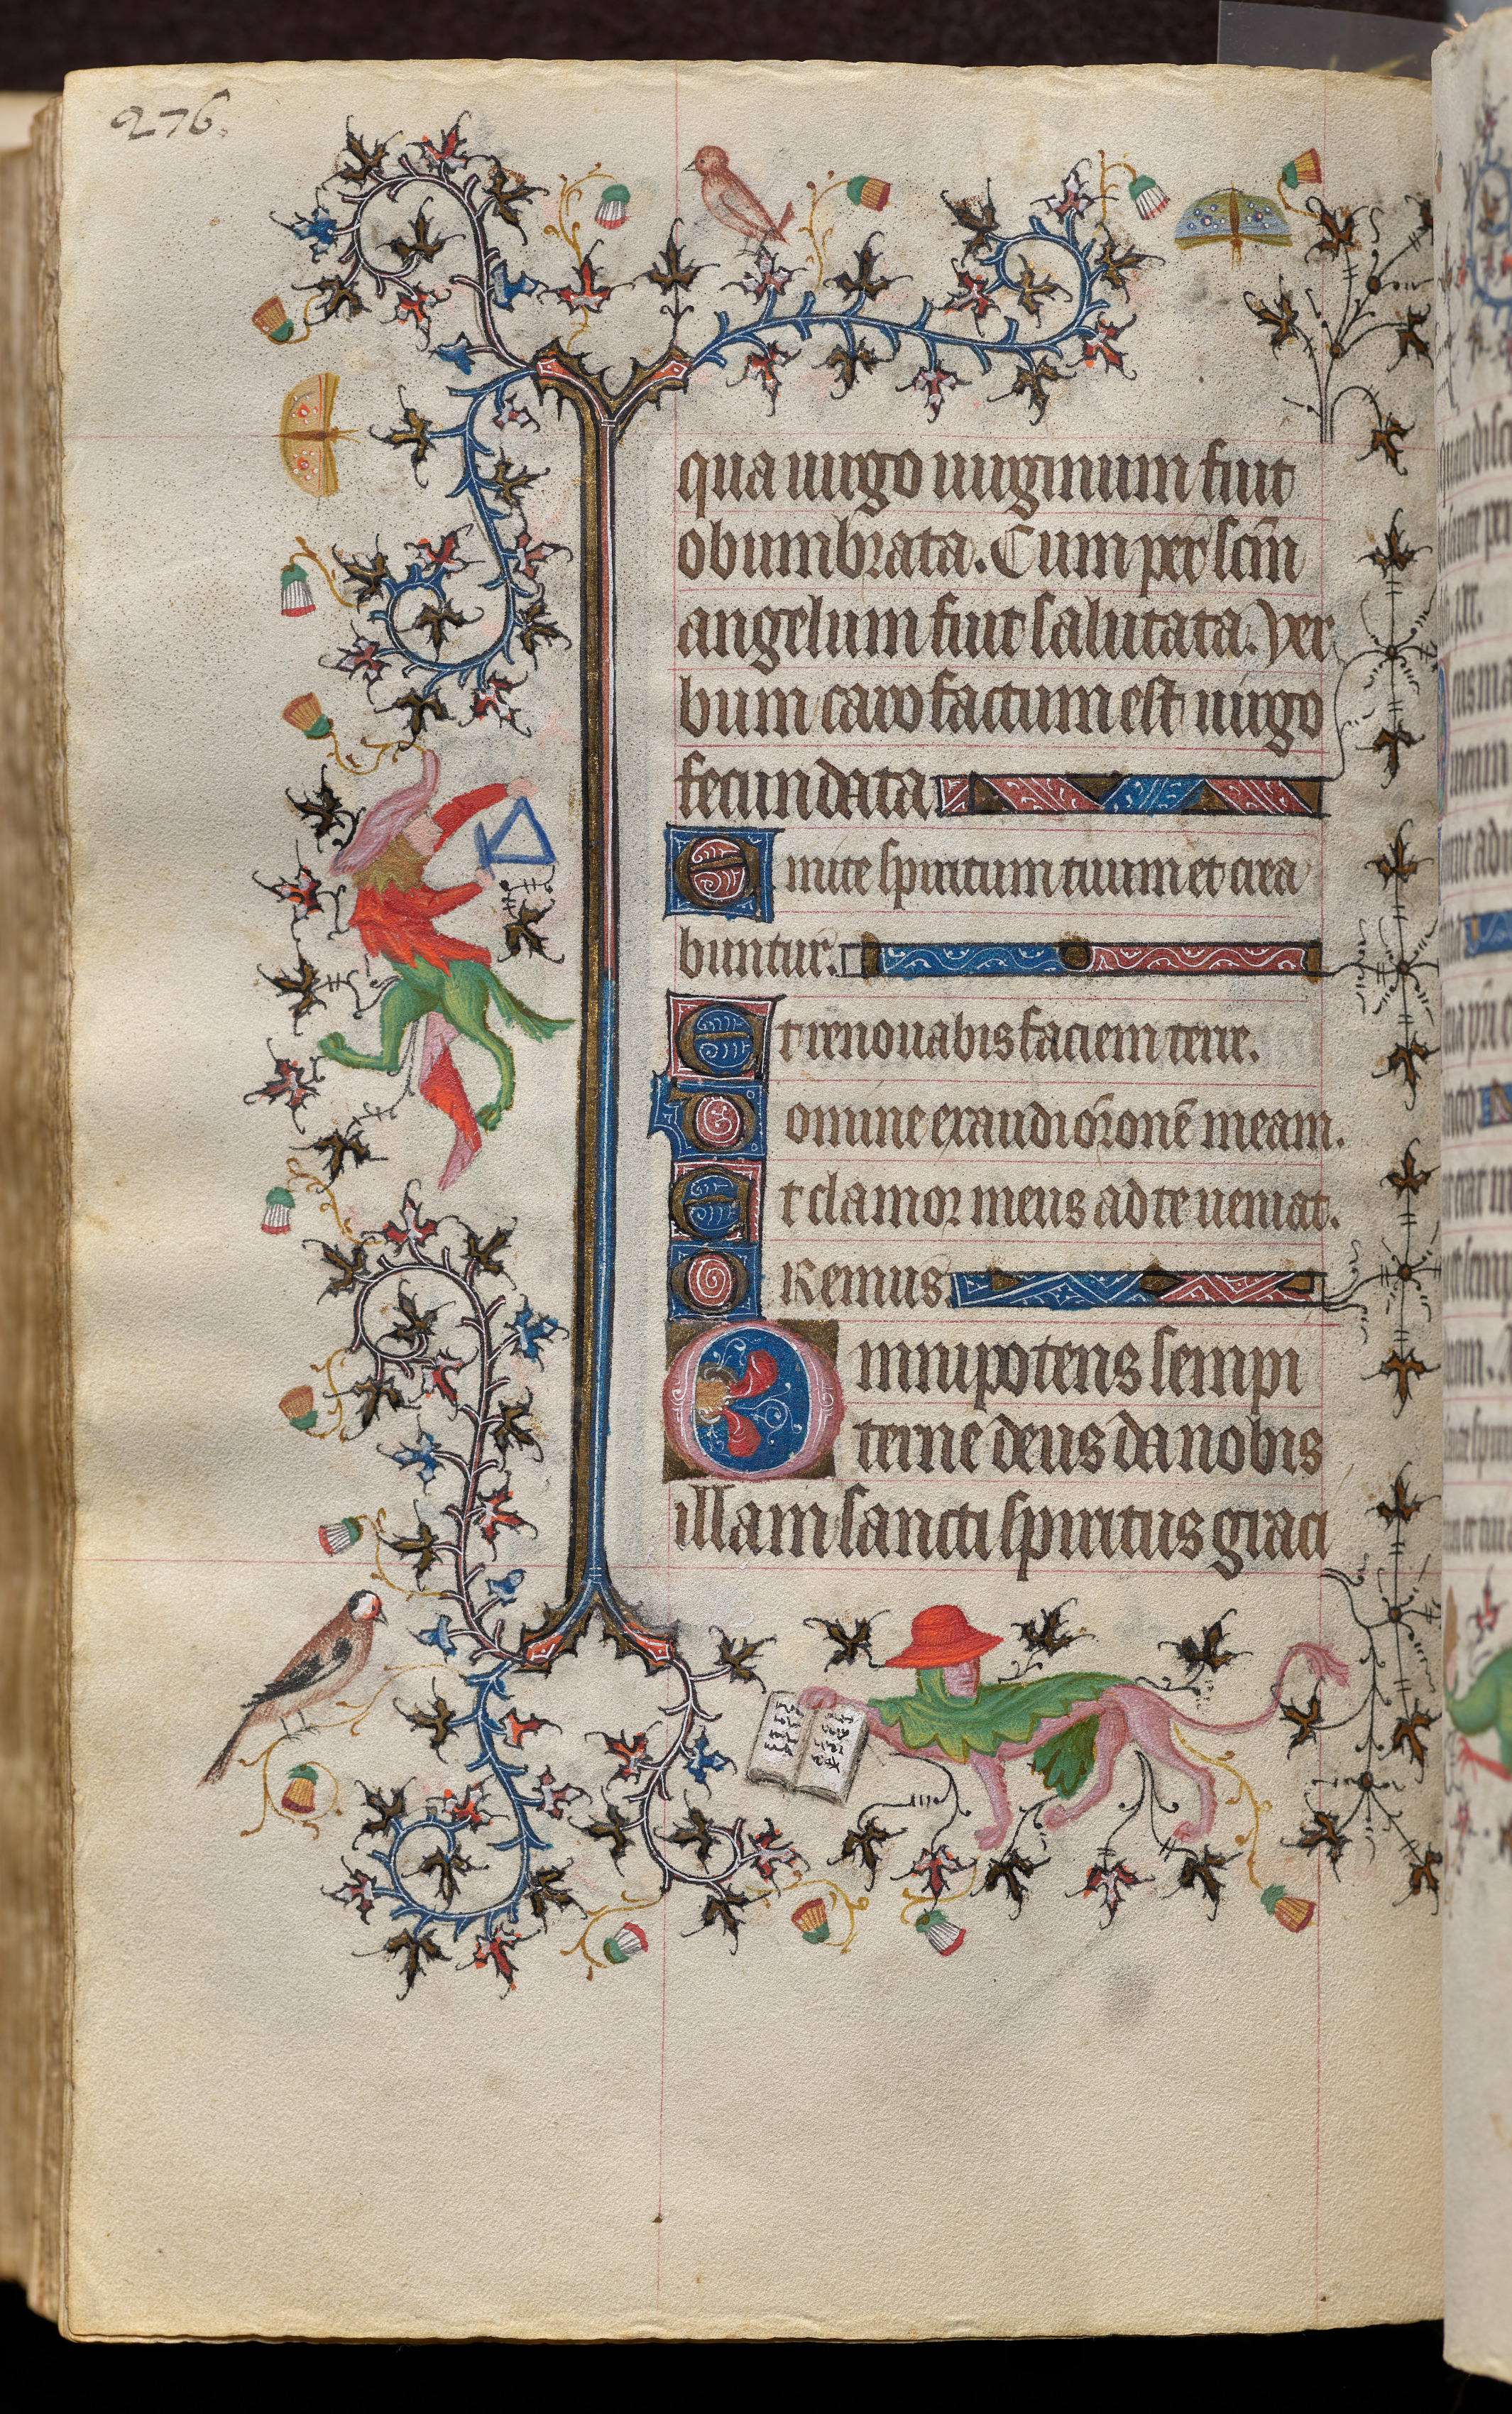 Hours of Charles the Noble, King of Navarre (1361-1425): fol. 138v, Text